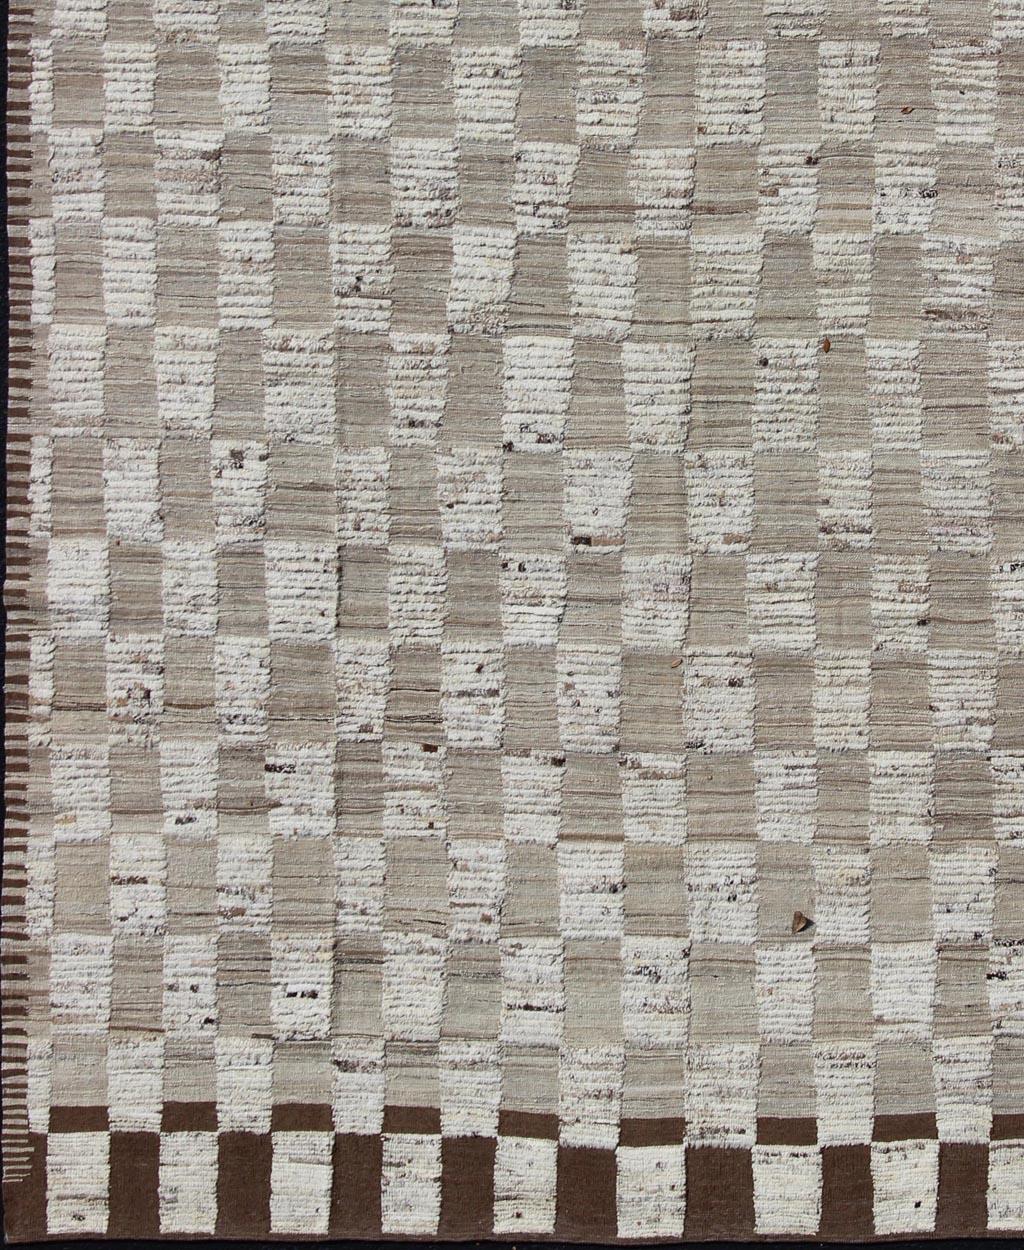 Hi-Low Piled Rug With Checkerboard Design in Earth Tones by Keivan Woven Arts

Measures: 9'6 x 12'6

Hi Low pile rug, combination of Kilim and pile Rug with Checkerboard Design in Earth Tones,
Shades of Taupe Modern Rug with Kilim-Piled Texture,